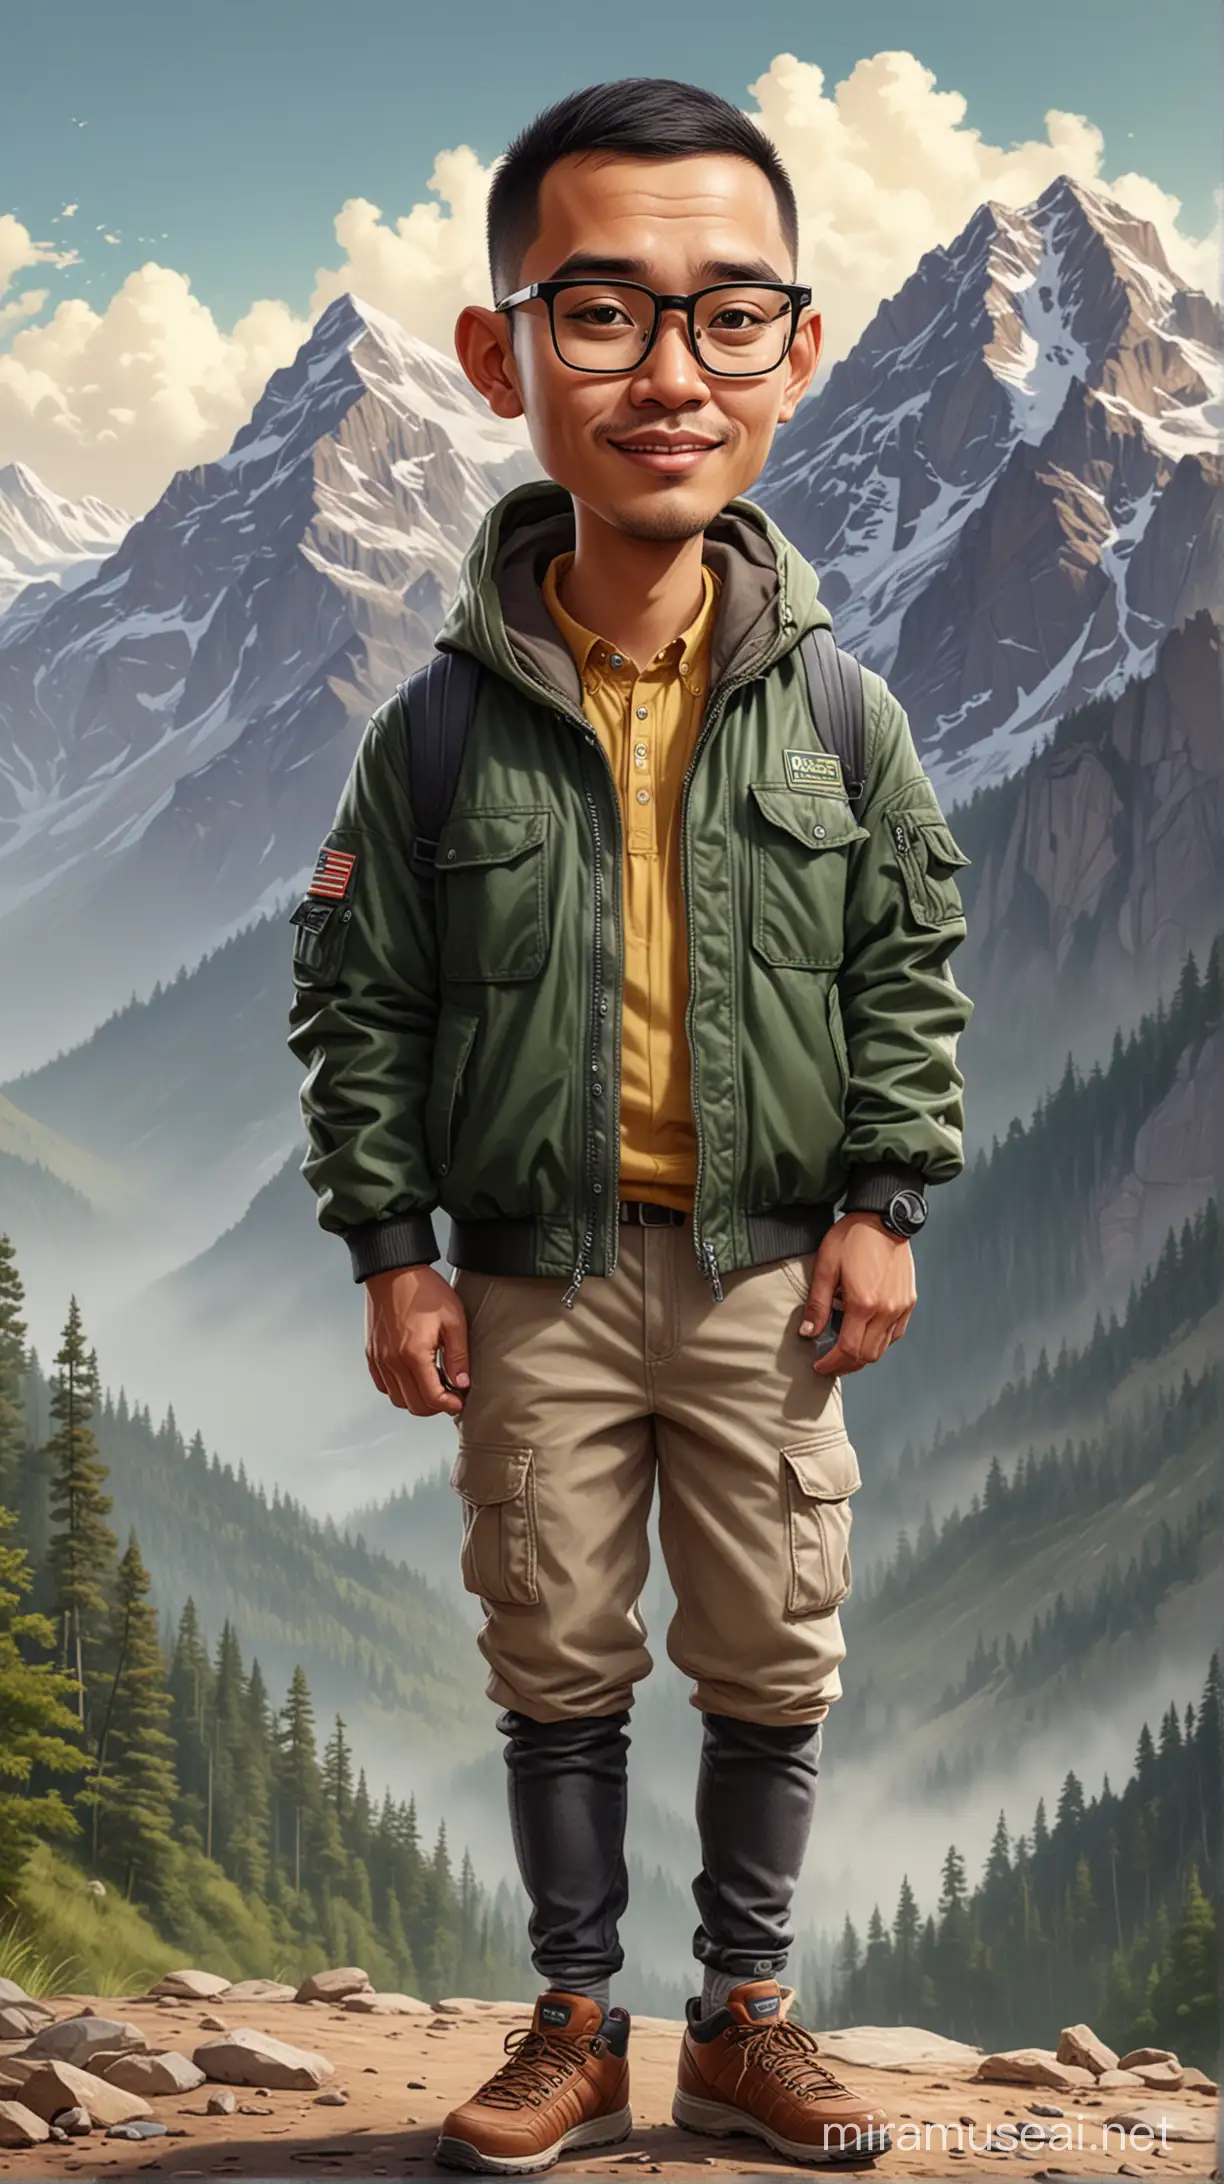 caricature potrait full body, A 29 year old Indonesian man, square face, neat short hair buzz cut, big head, wearing glasses, wearing a jacket, outdoor shoes, and mountain equipment, mountain as background. realistic.